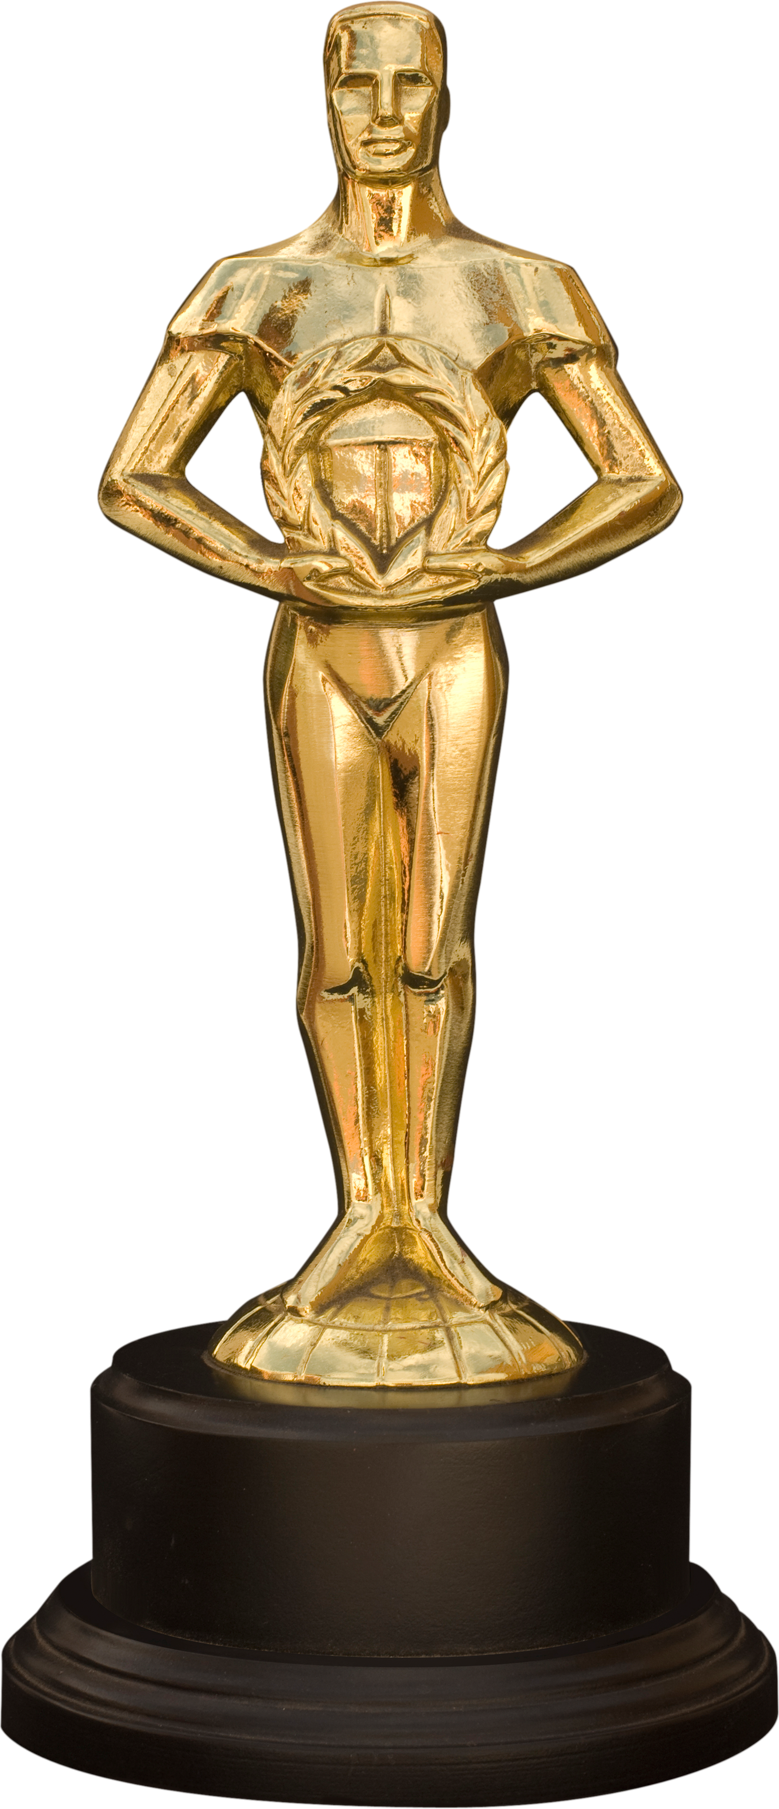 Golden Award Picture Download Free Image PNG Image